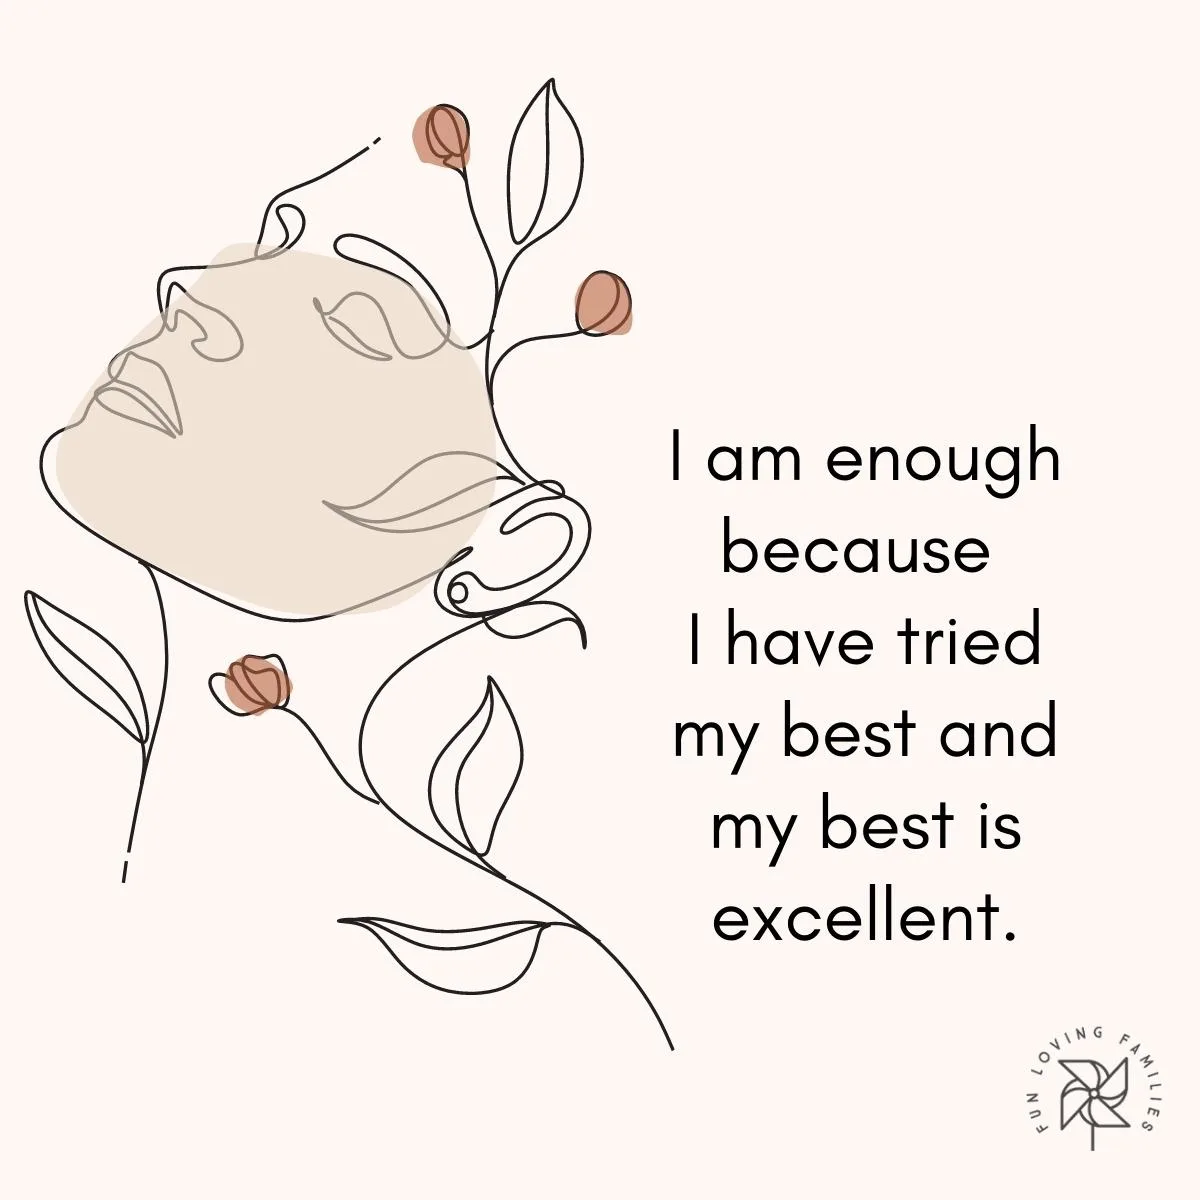 I am enough because I have tried my best and my best is excellent affirmation